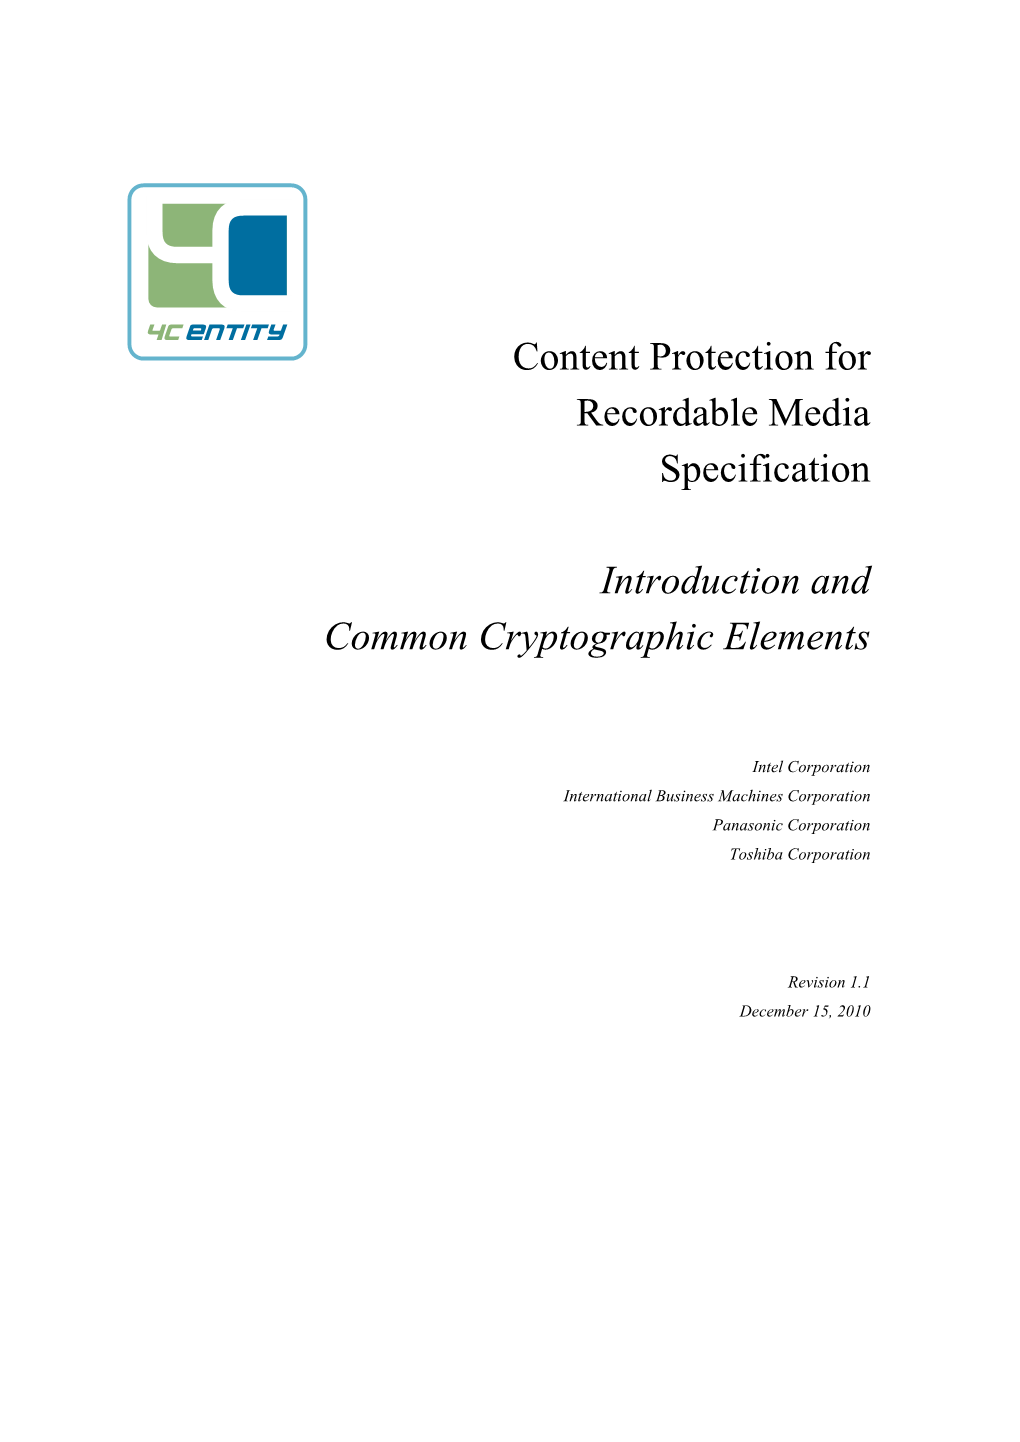 CPRM Specification, Introduction and Common Cryptographic Elements